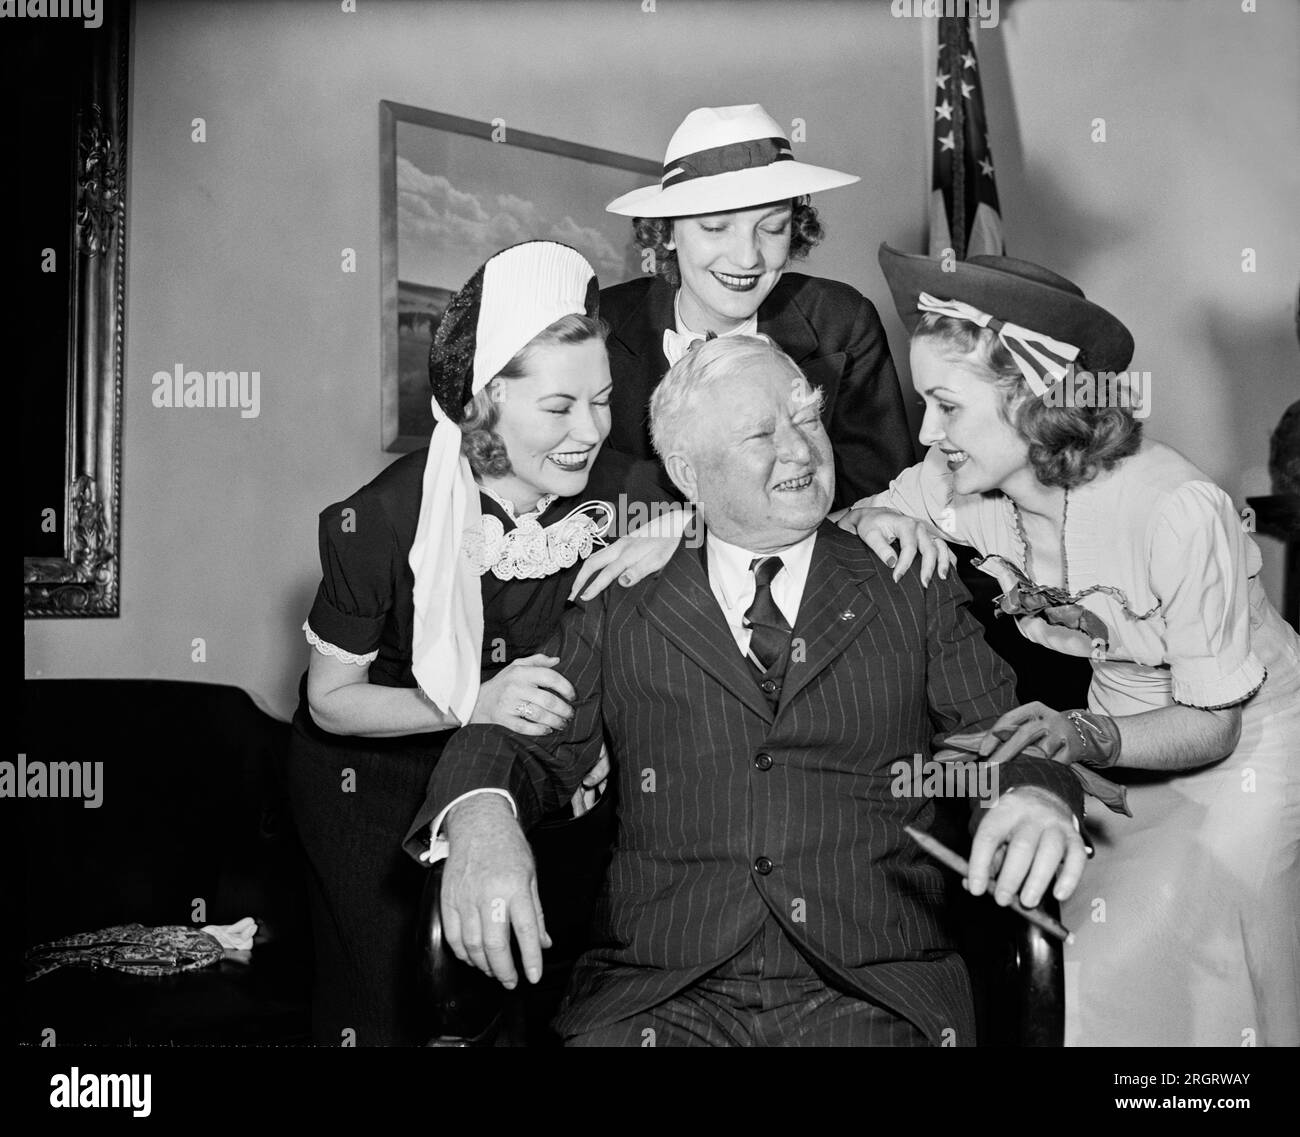 Washington, D.C.:  May 19, 1938 Vice President John Nance Garner was in fine fettle as he greeted visiting South Carolina azalea beauty queens. L-R: Elizabeth West, 1937 Azalea Queen; Margaret Lyon, 'Miss Charleston' of this year; and Dorothy Moore, Azalea Queen of 1938. Stock Photo